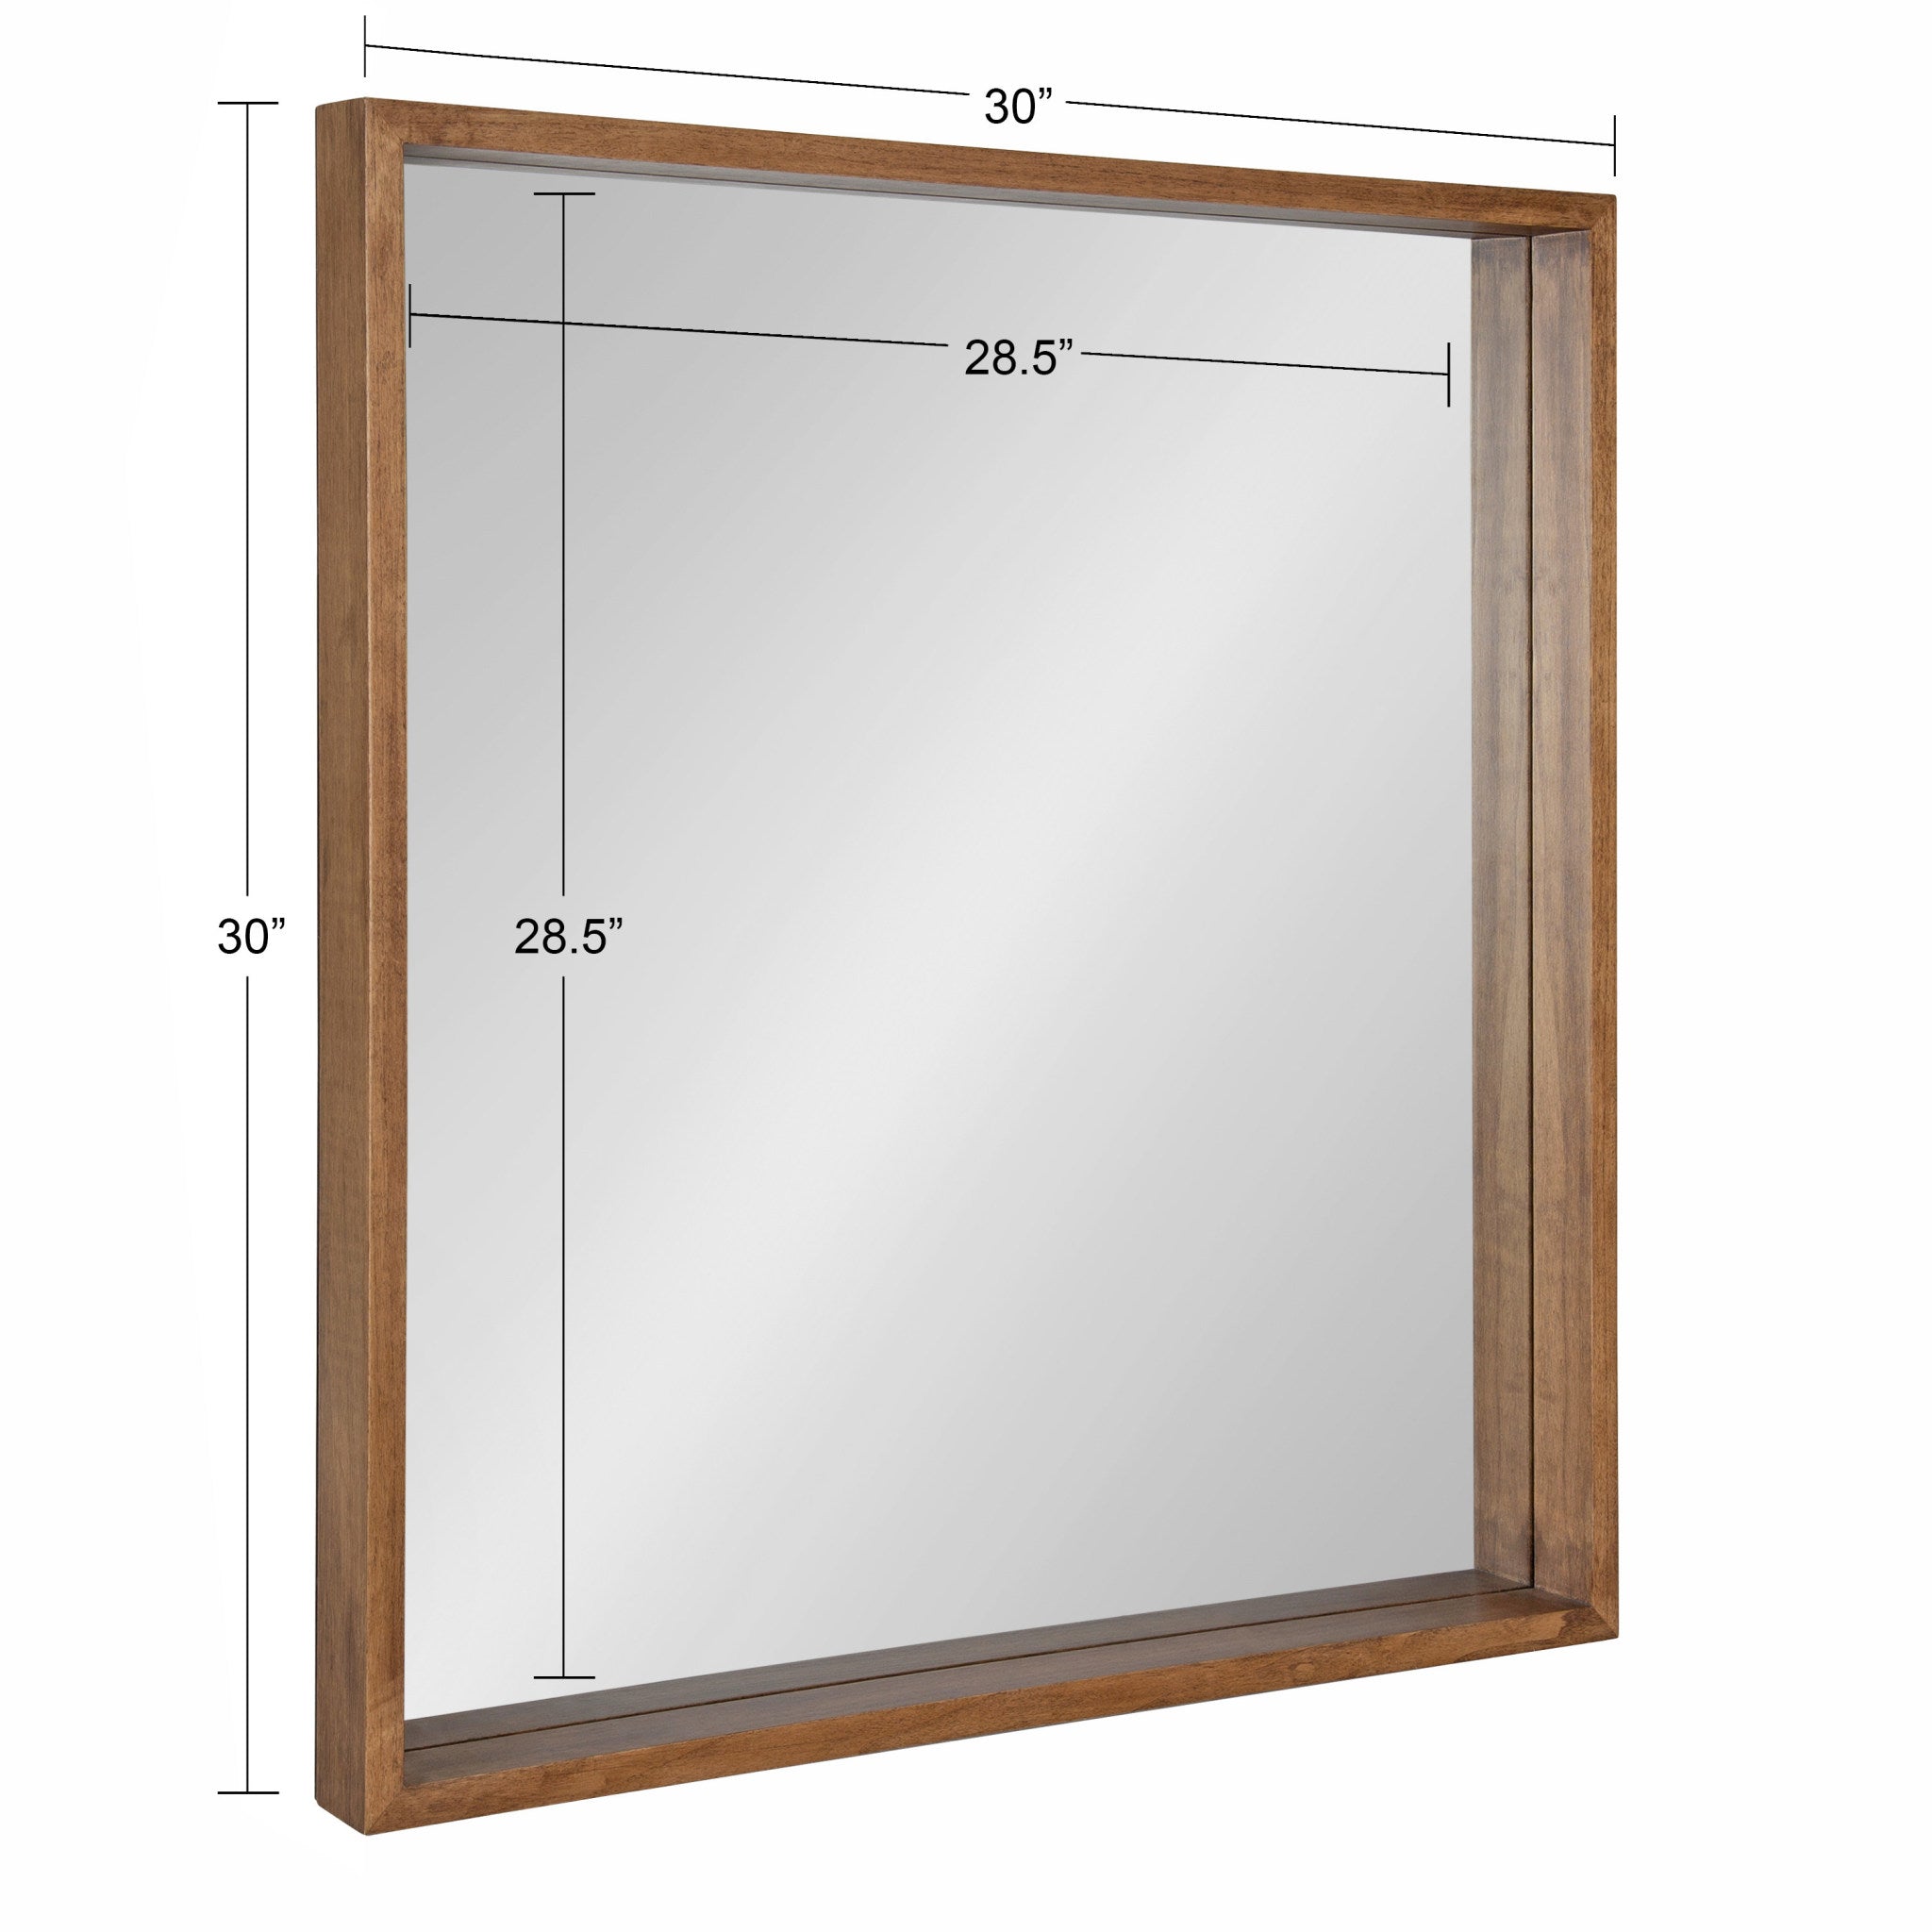 Hutton Wood Framed Square Mirror